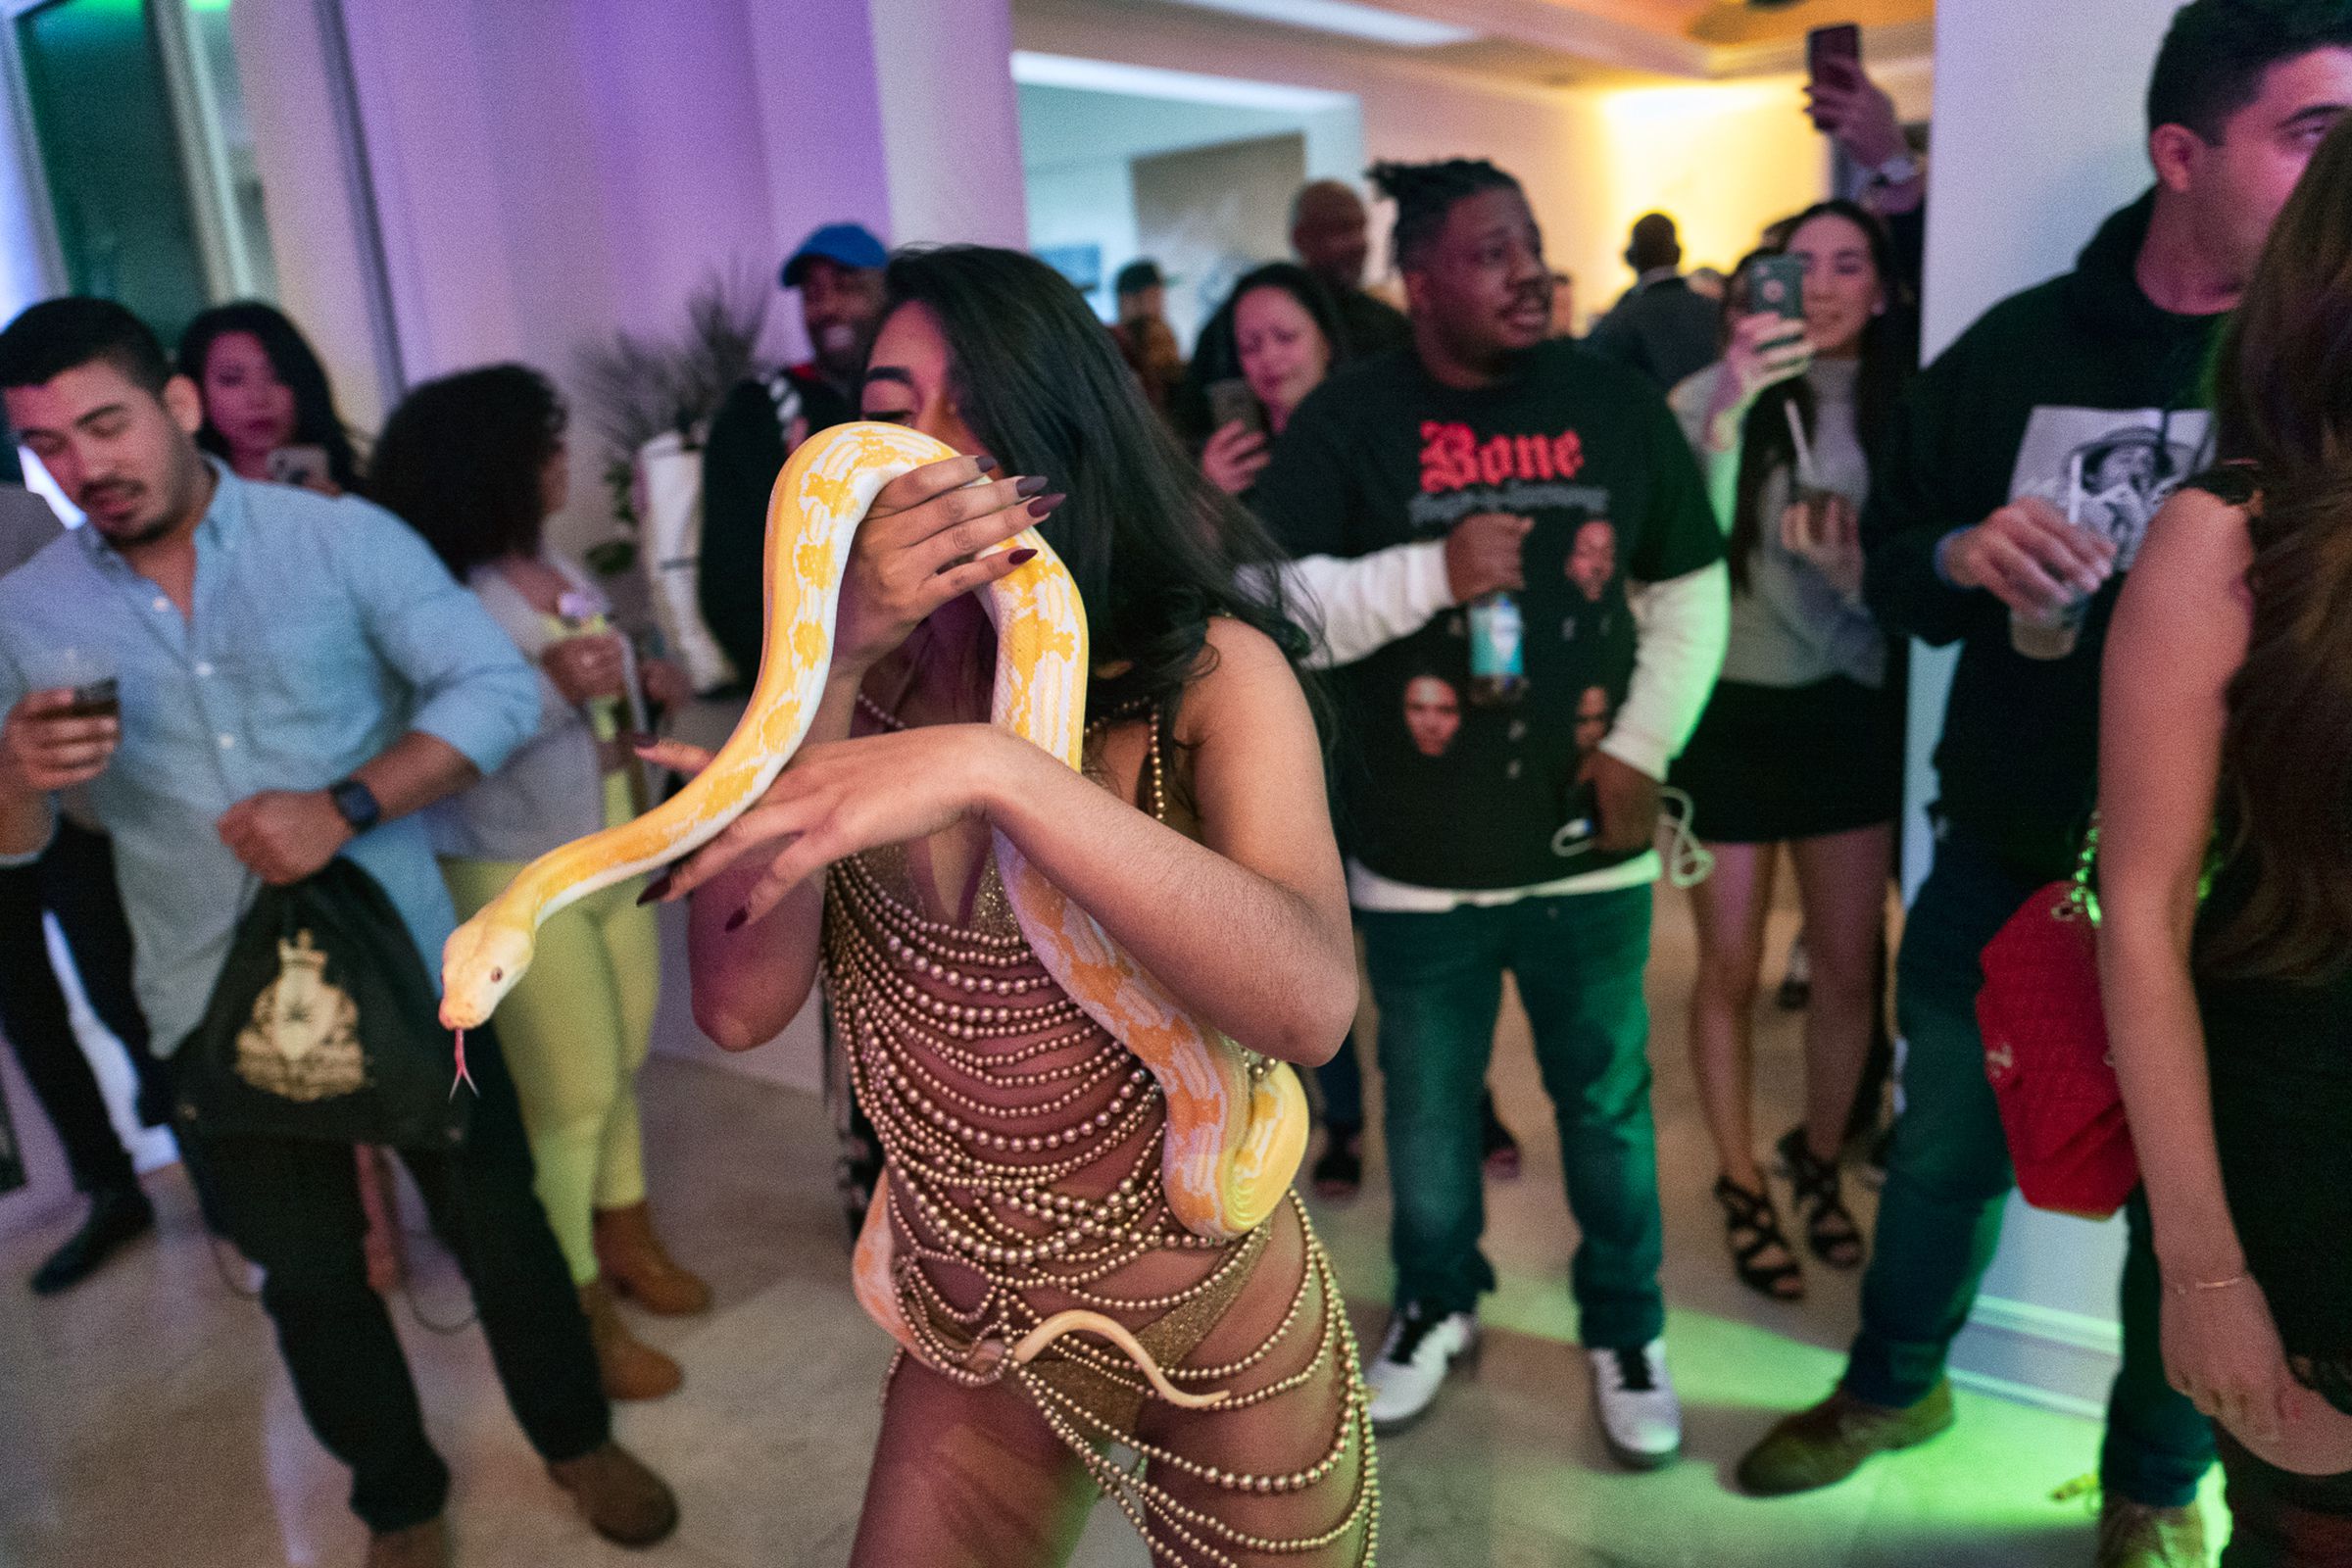 A party at the house involved women carrying around snakes.